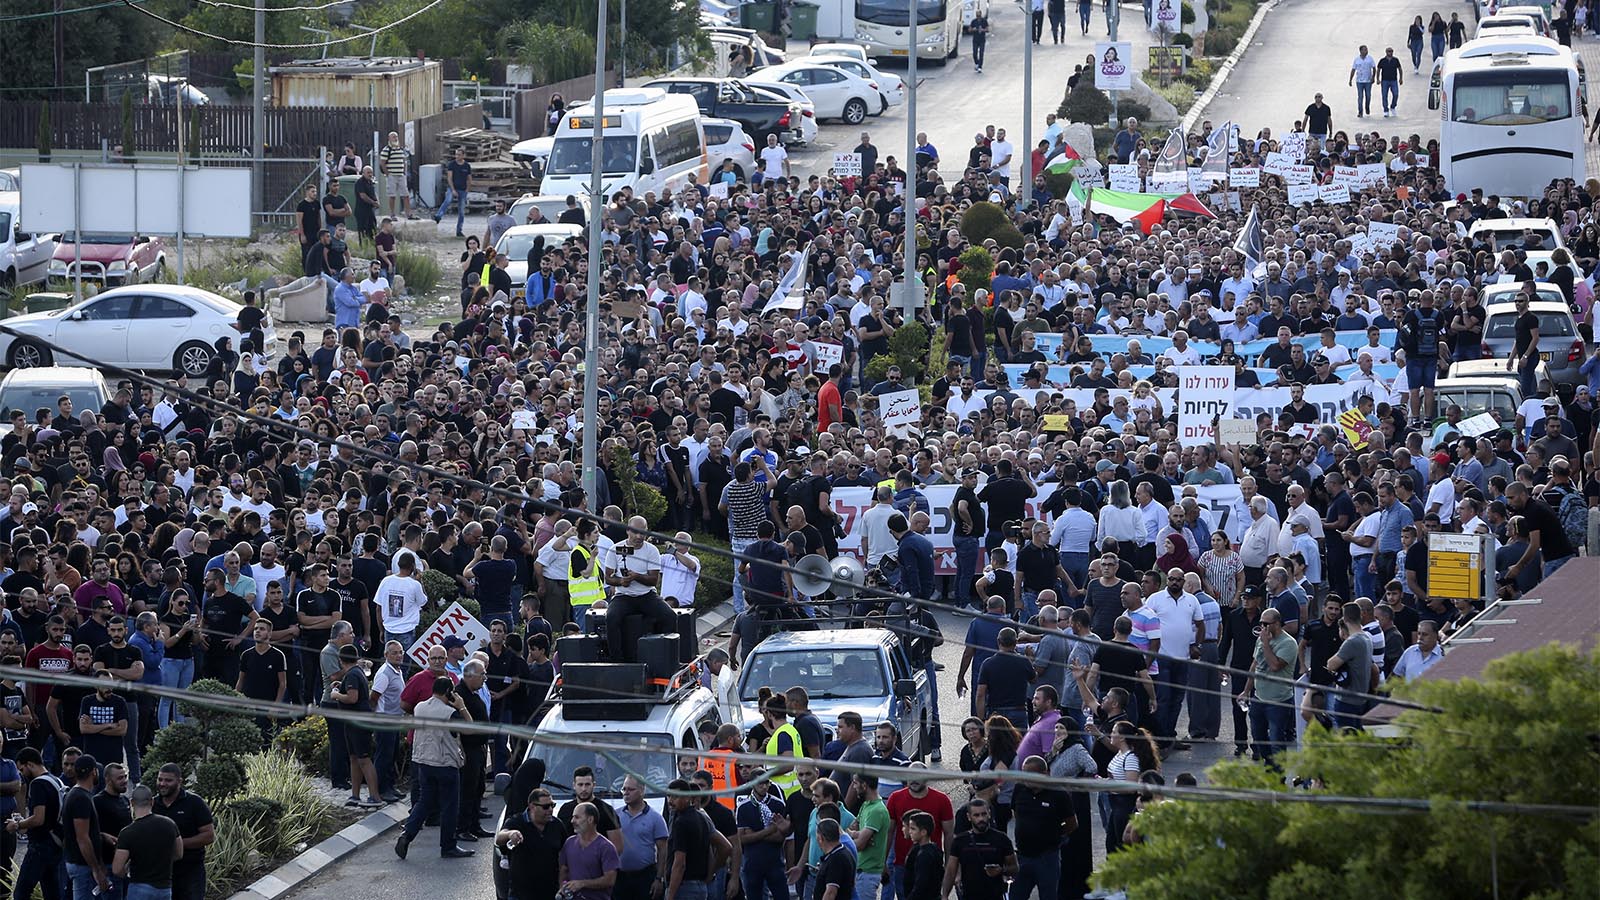 Israeli Arabs protest against violence, organized crime and recent killings in the Arab town of Majd al-Krum, Northern Israel. October 3, 2019. Photo by David Cohen/FLASH90